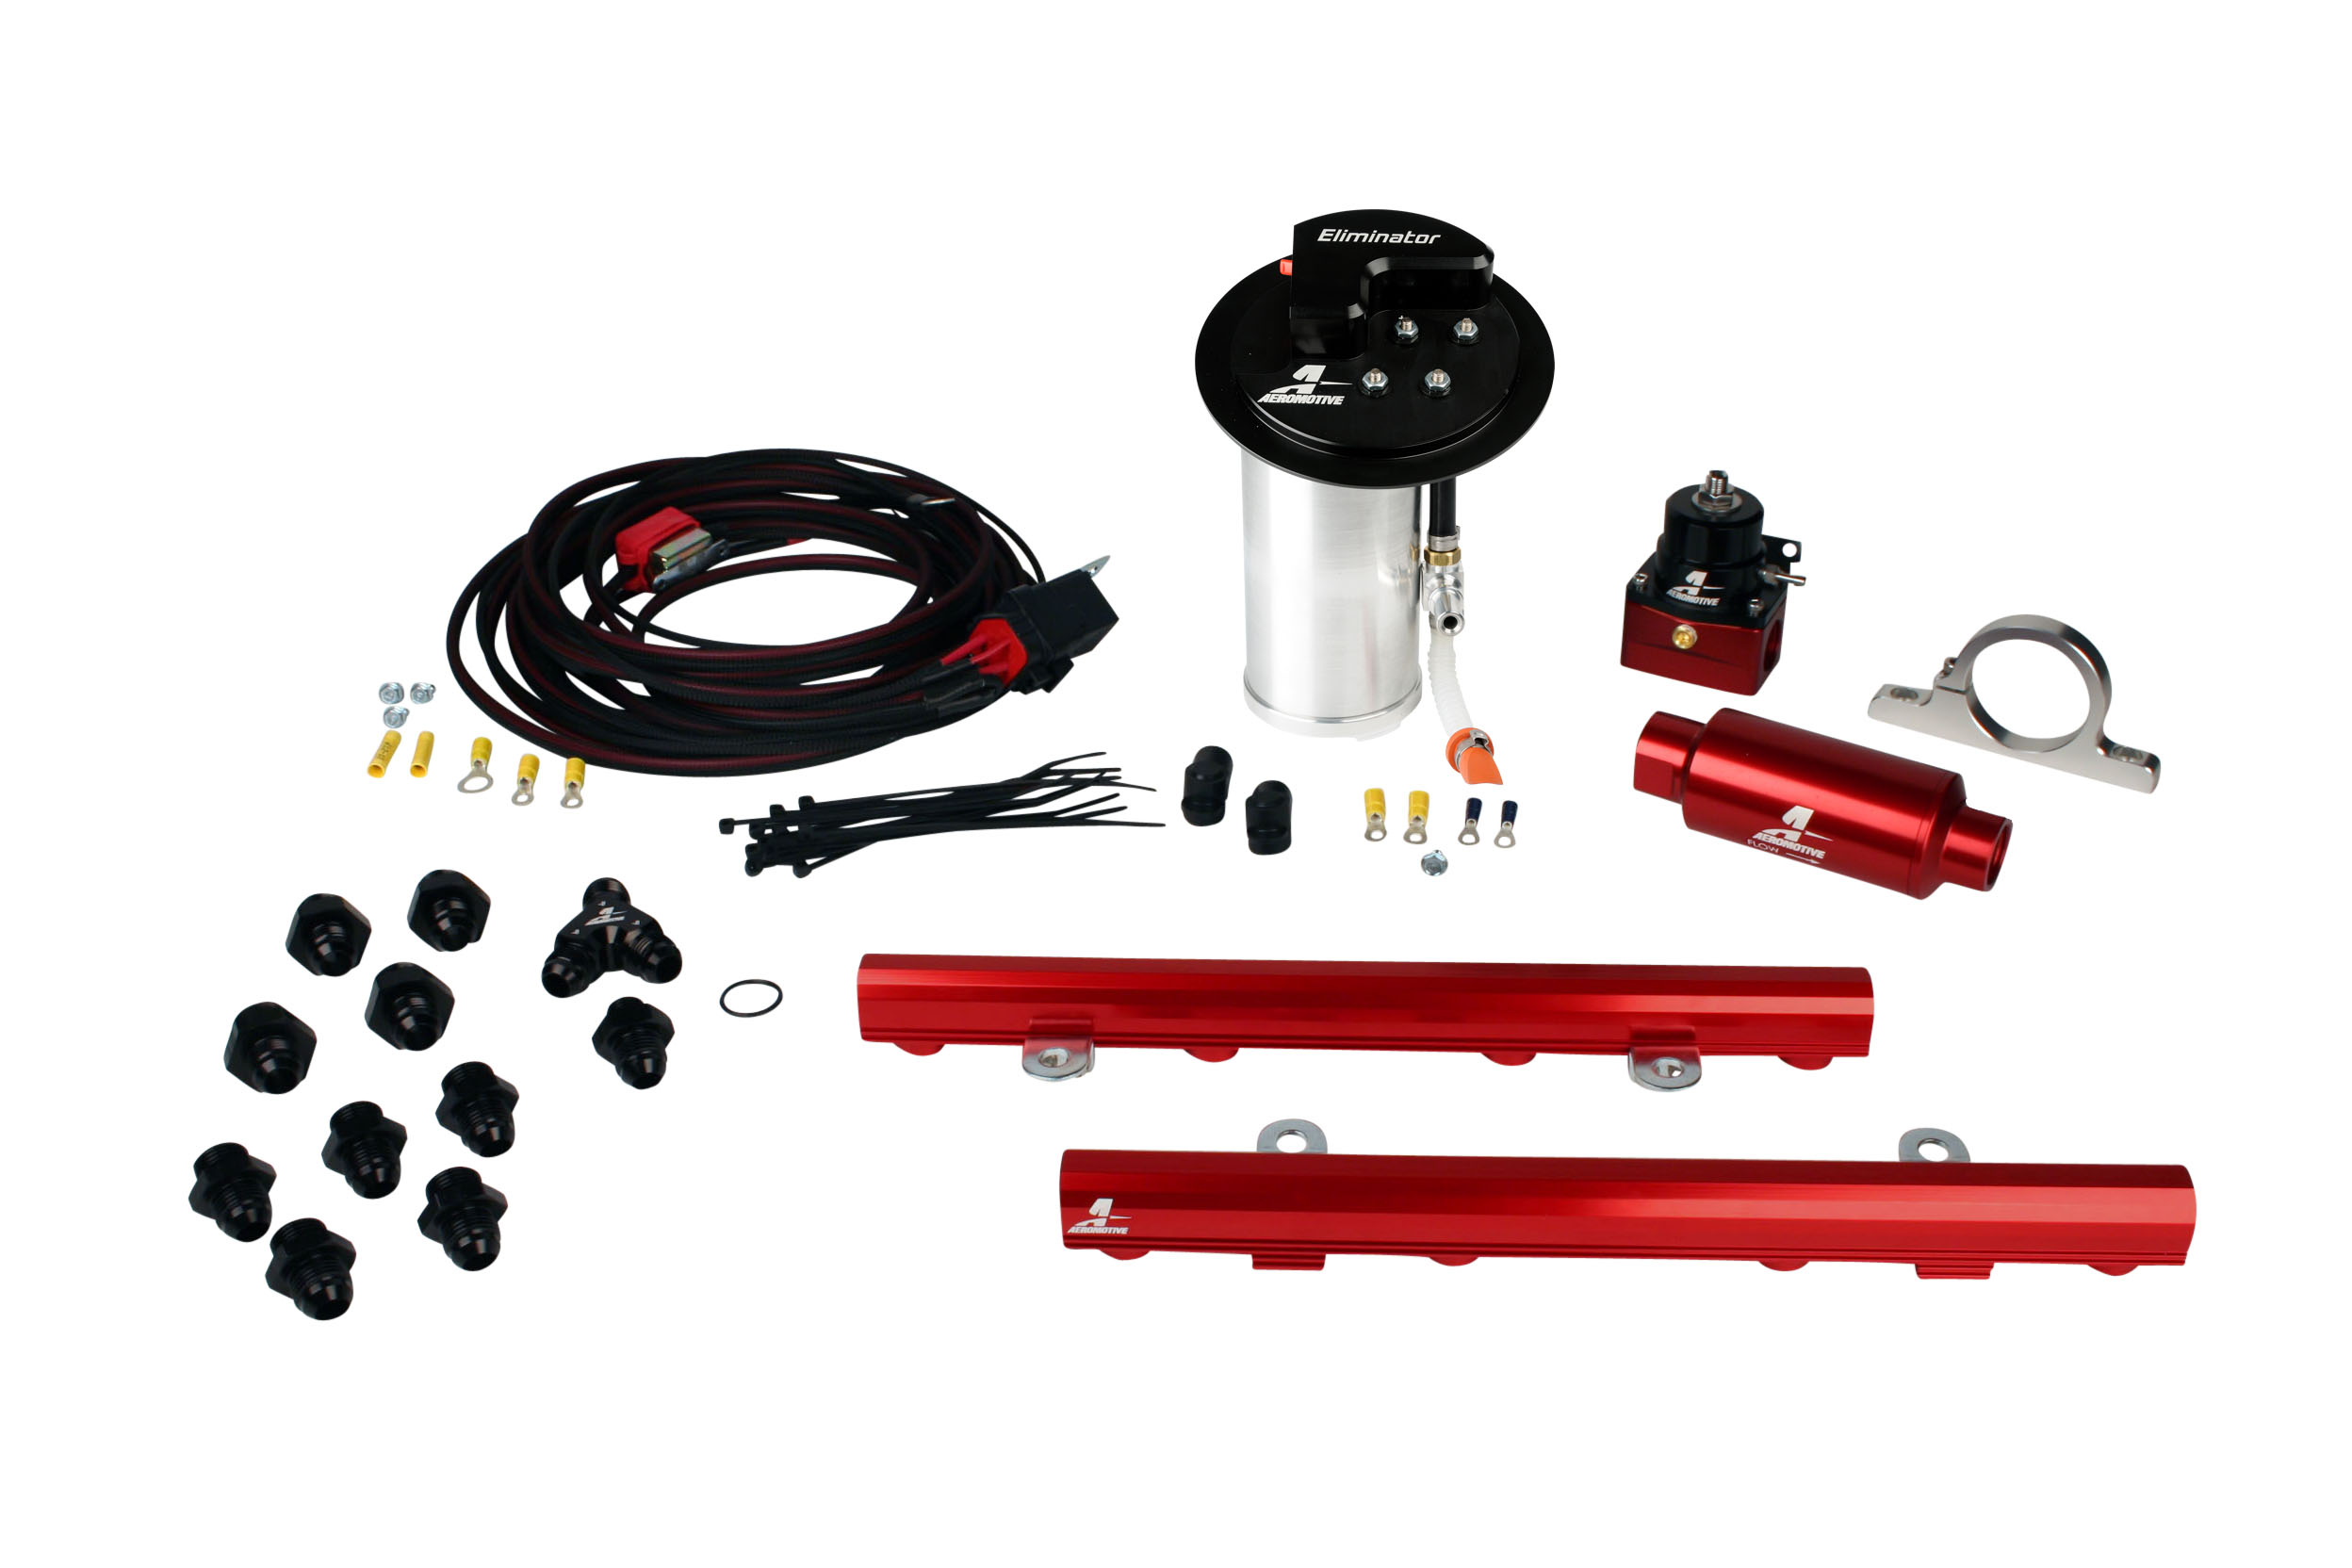 2010-2017 Ford Mustang GT Aeromotive Stealth A1000 Race Fuel System w/5.0L 4 Valve Fuel Rail